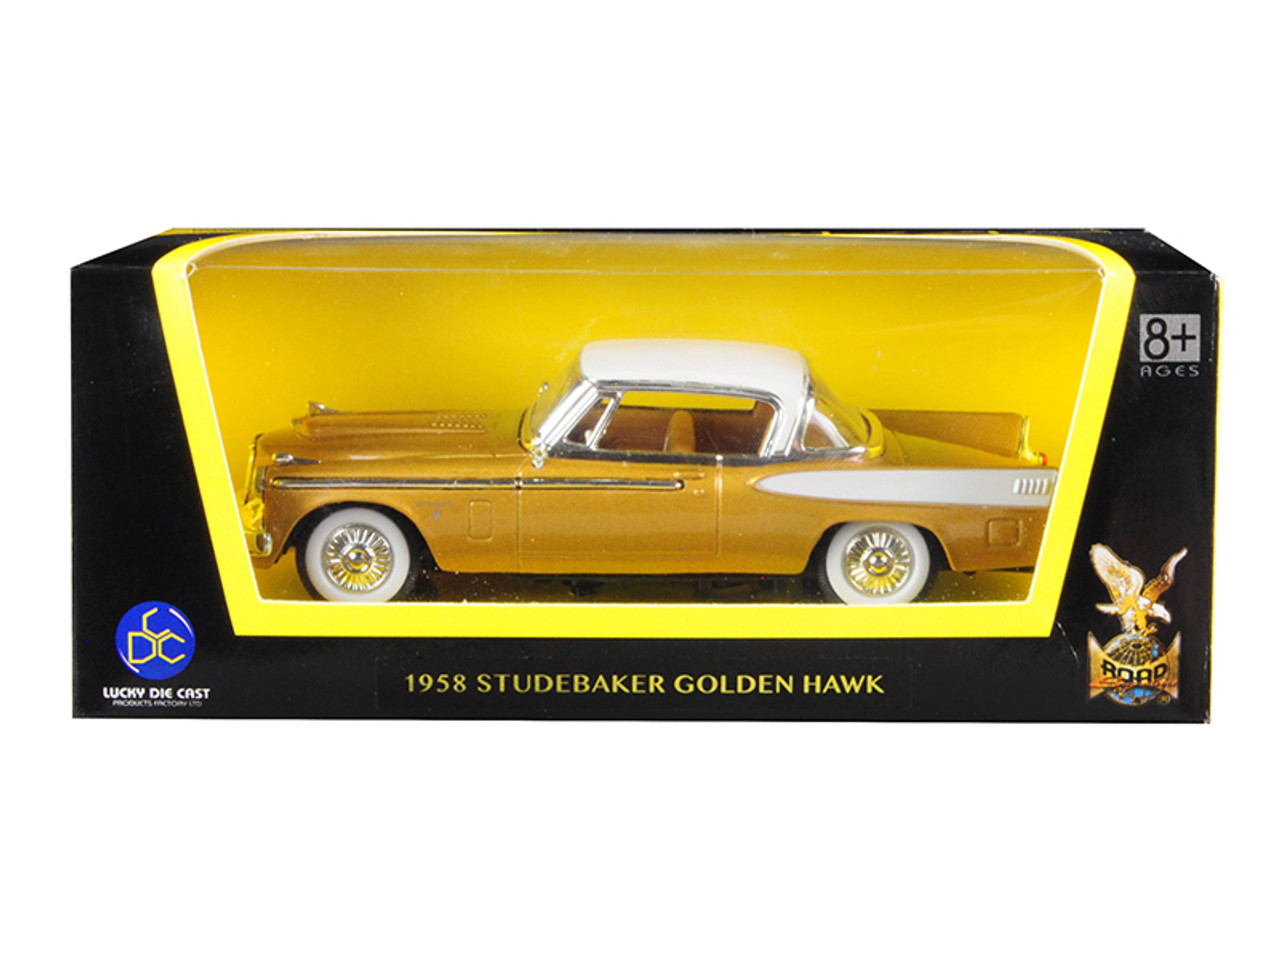 1958 Studebaker Golden Hawk Gold and White Top 1/43 Diecast Model Car by Road Signature